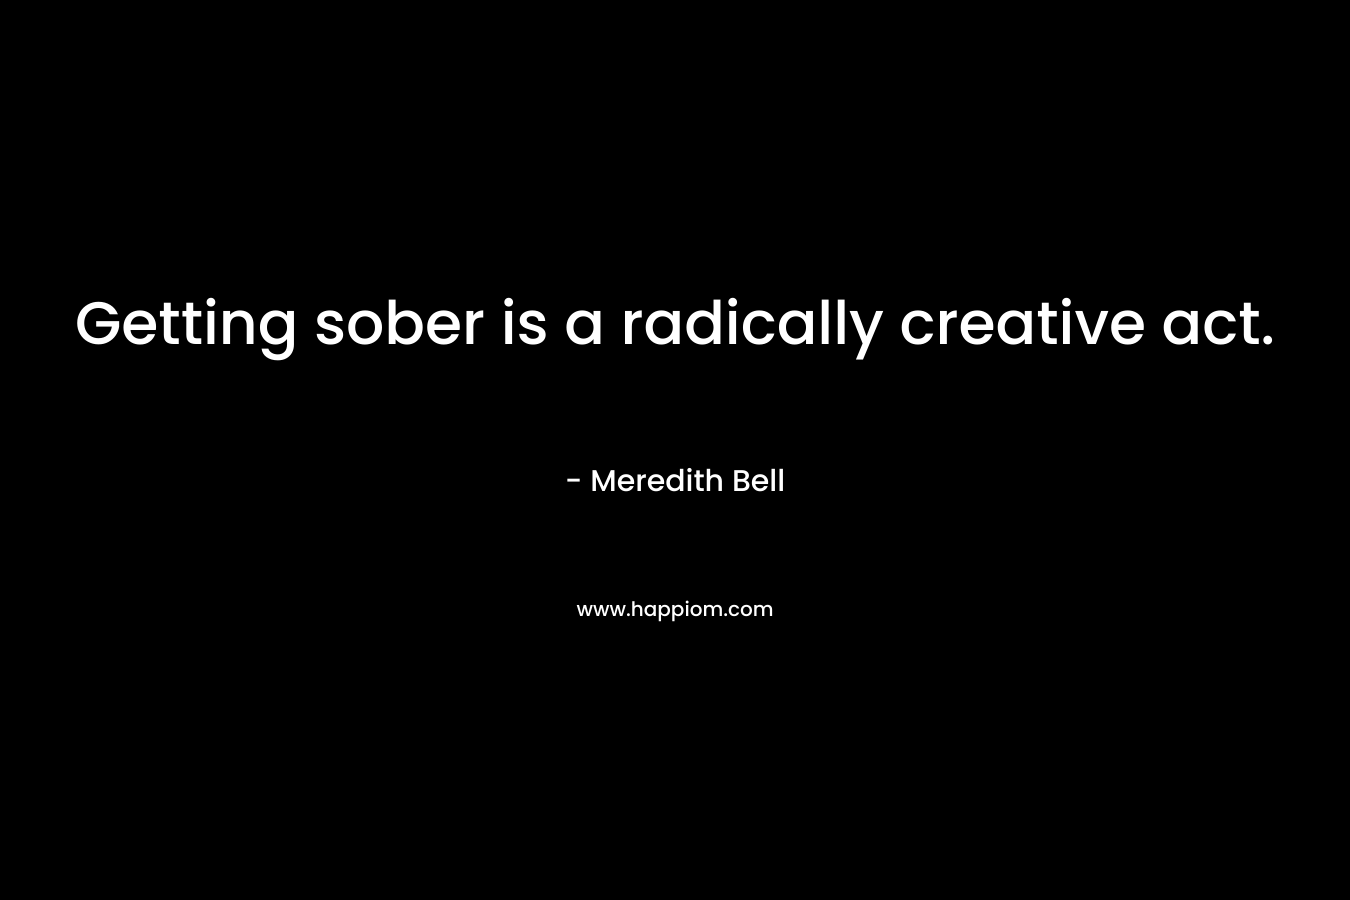 Getting sober is a radically creative act. – Meredith Bell